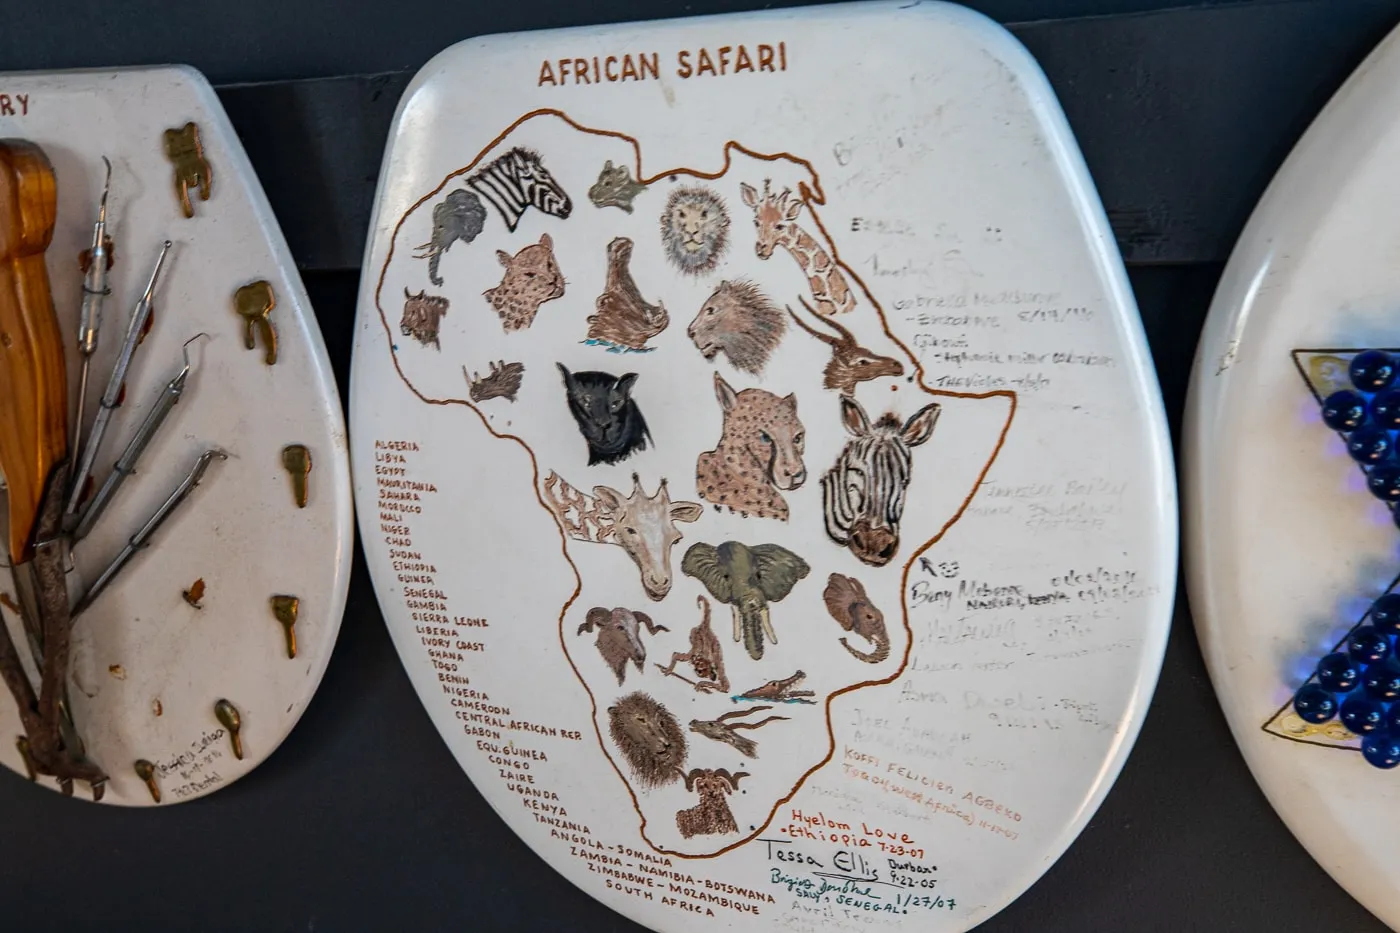 African Safari toilet Seat - Barney Smith's Toilet Seat Art Museum in The Colony, Texas at The Truck Yard Bar